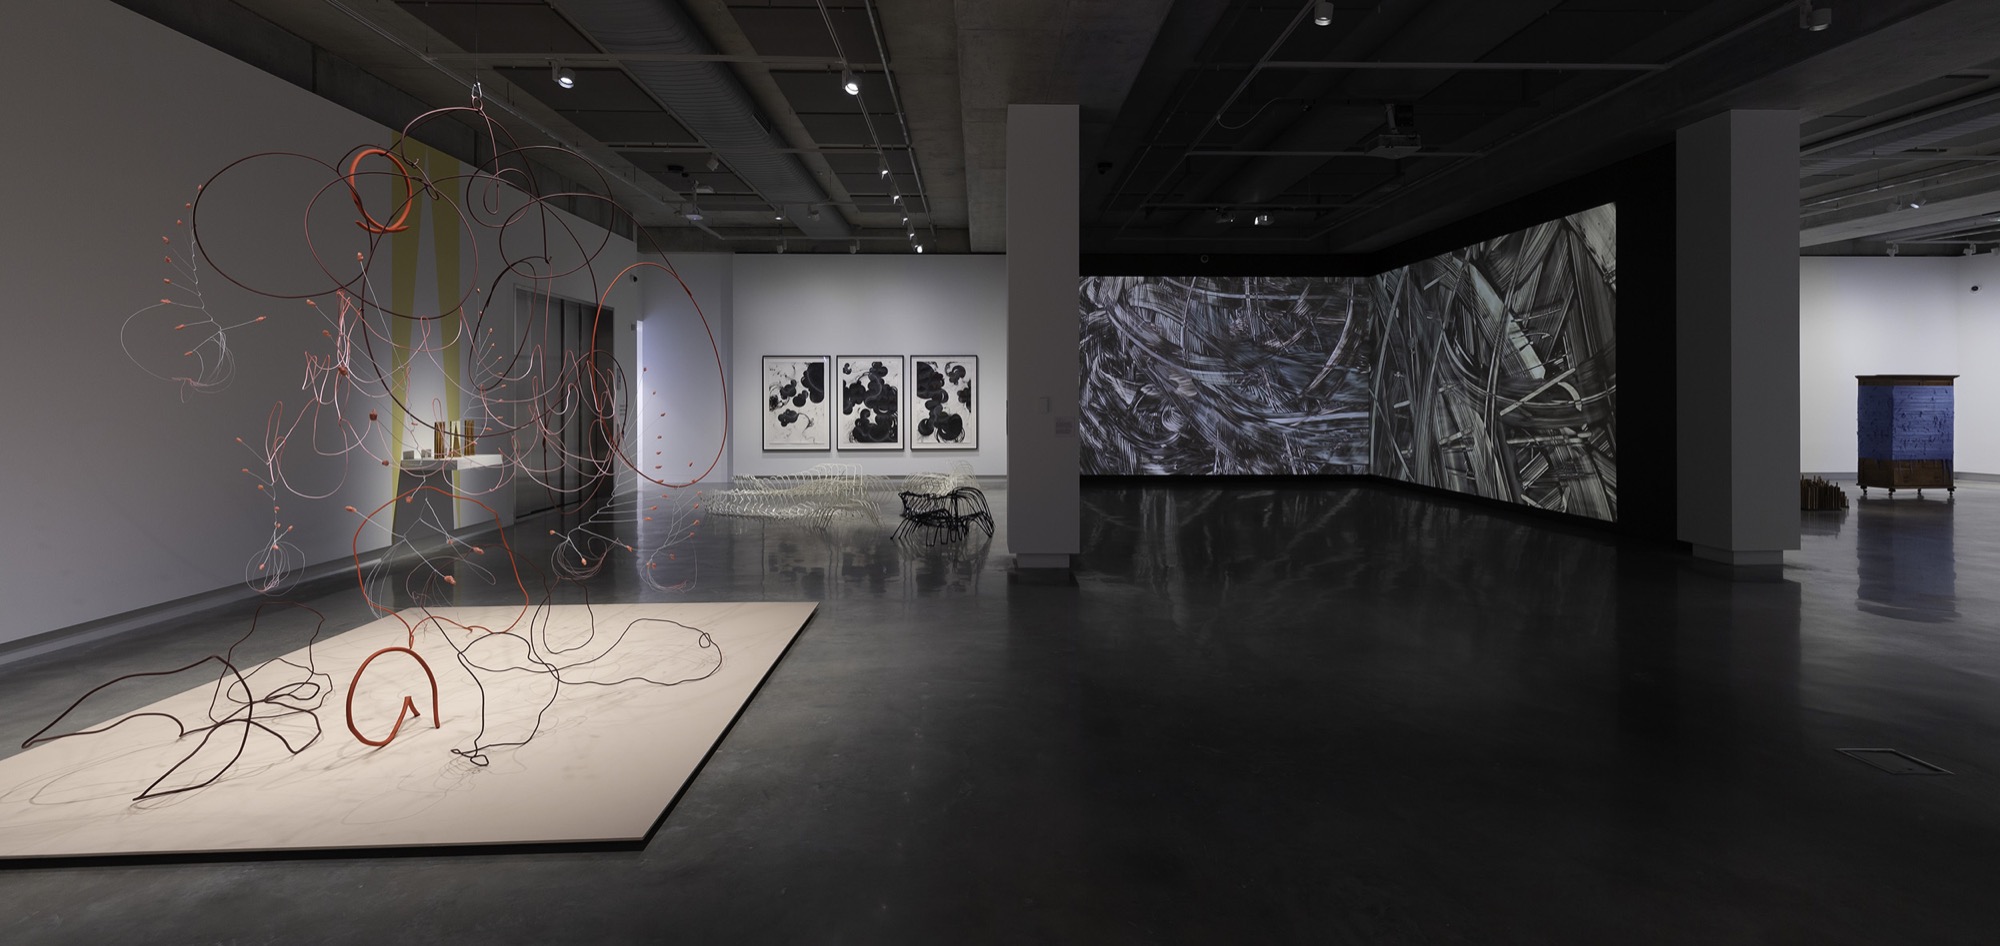 Installation view, Mira Gojak and Takehito Koganezawa, <em>The Garden of Forking Paths</em>. Image courtesy the artists and Buxton Contemporary.